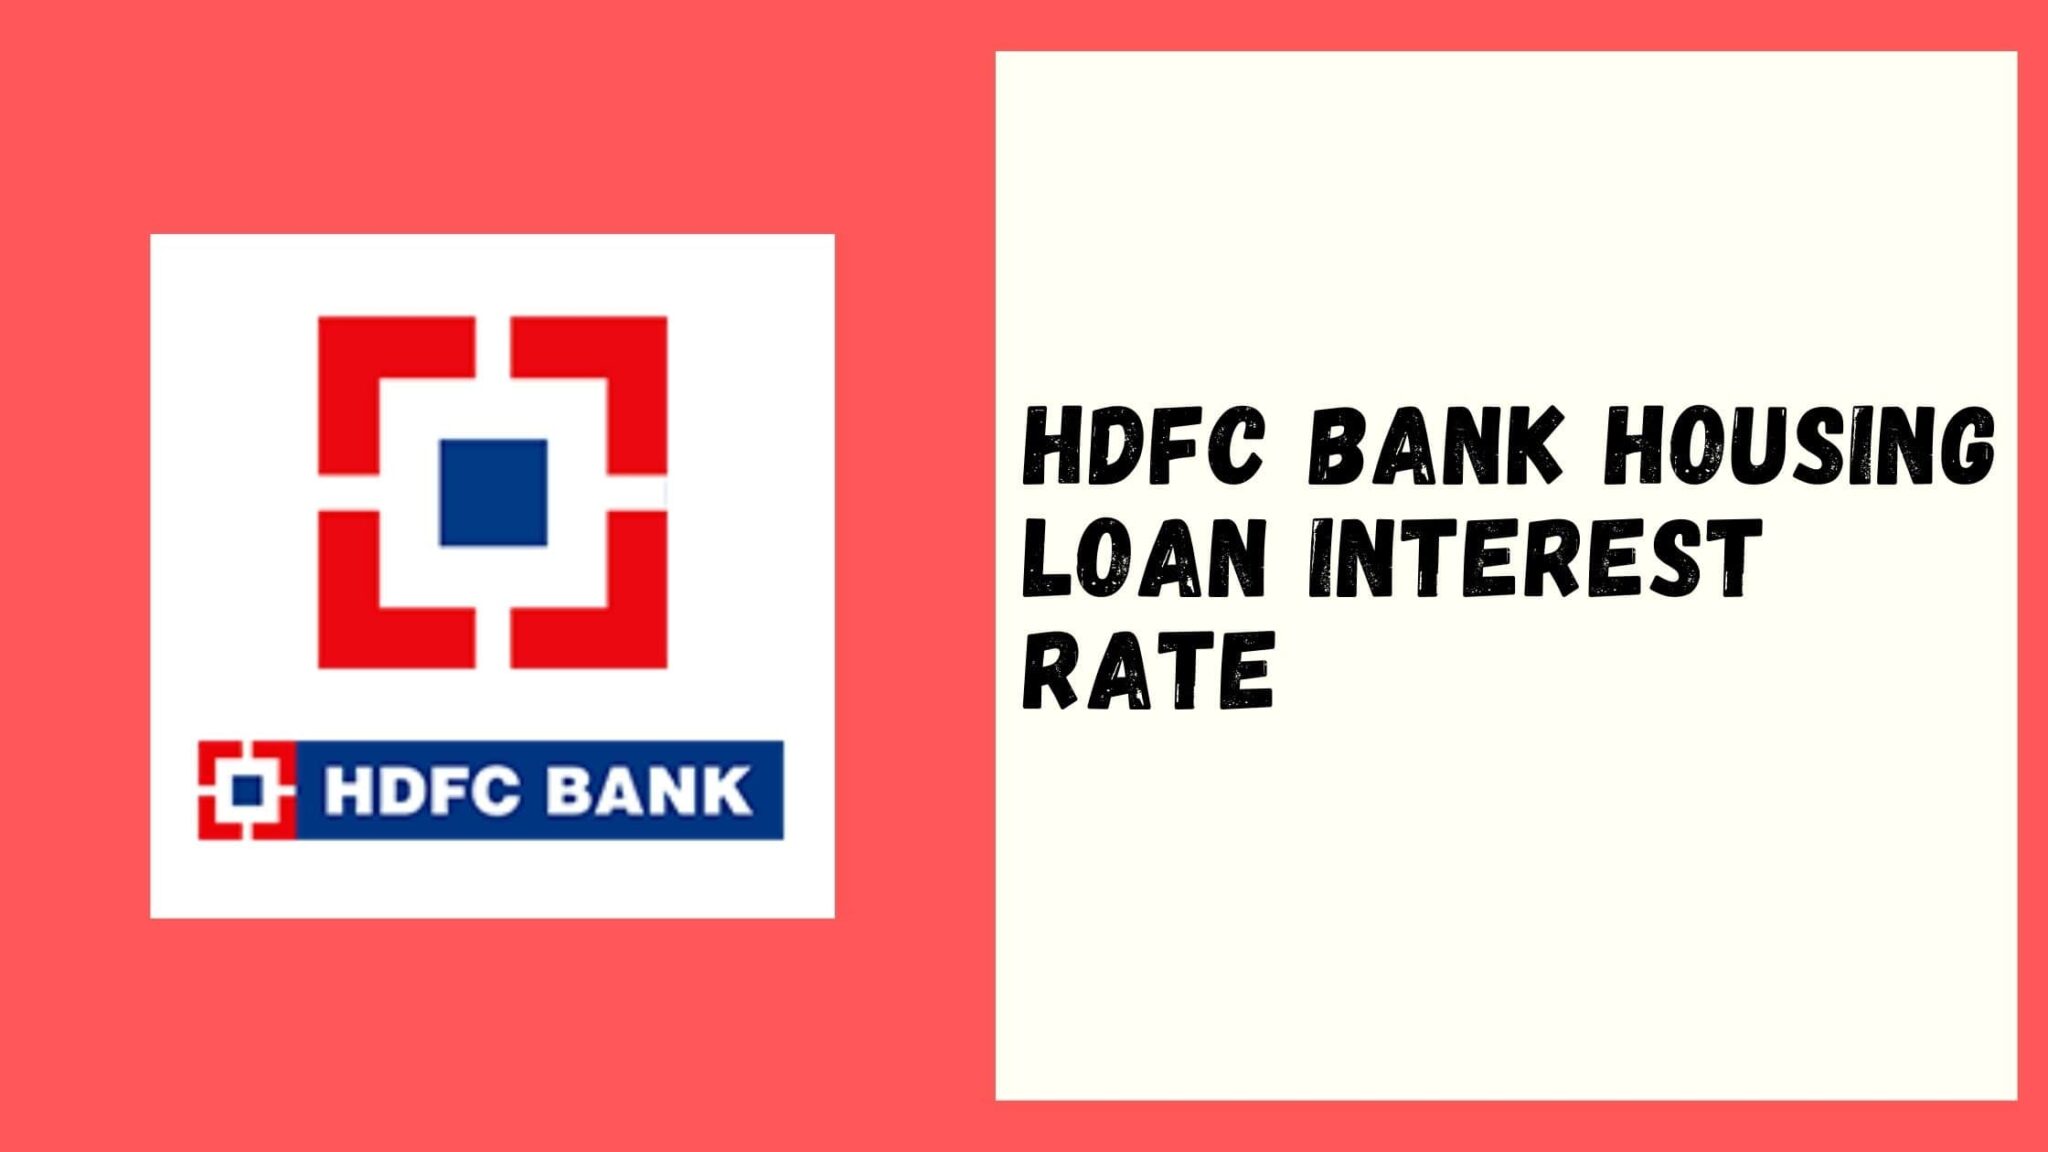 Let's find out HDFC Bank Housing Loan Interest Rate In 2021.